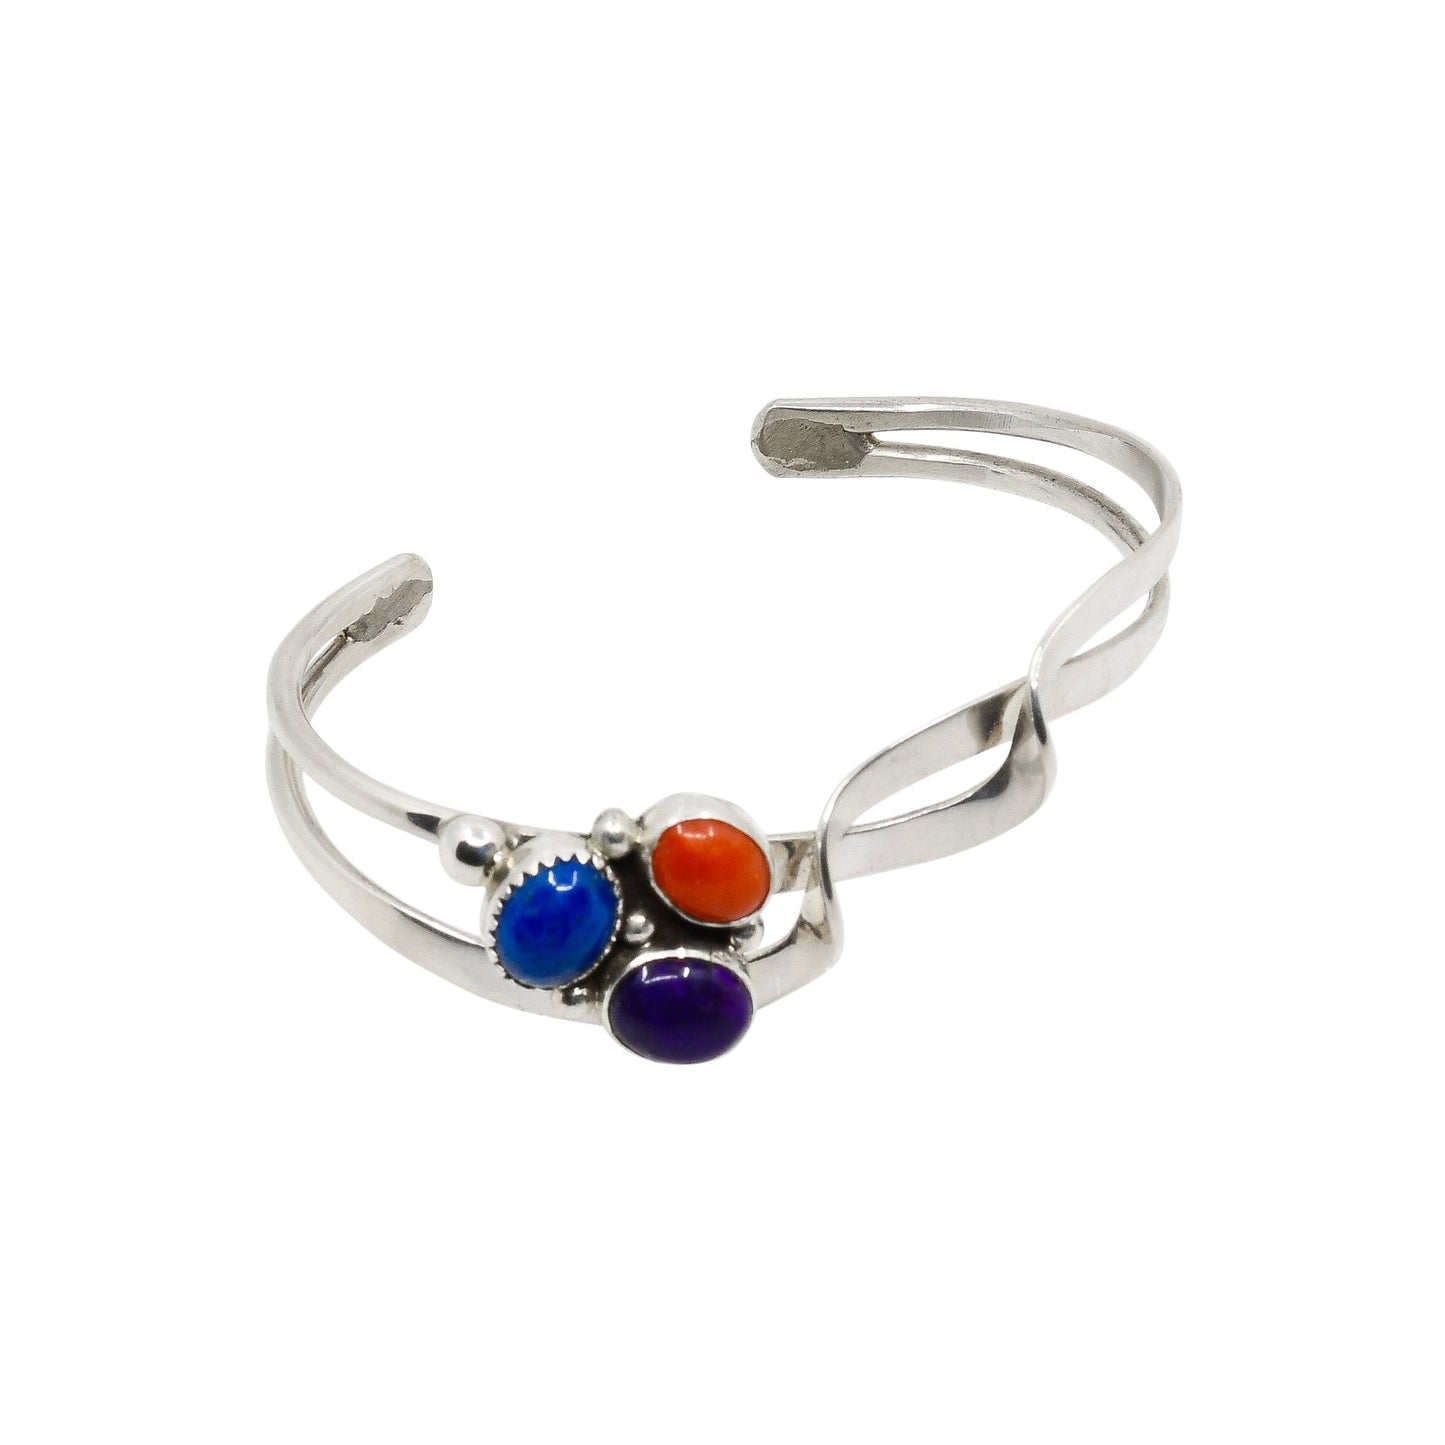 Navajo Silver Strand Bracelet of Coral Lapis and Sugilite By Lorraine Ann Hesuse - Turquoise & Tufa